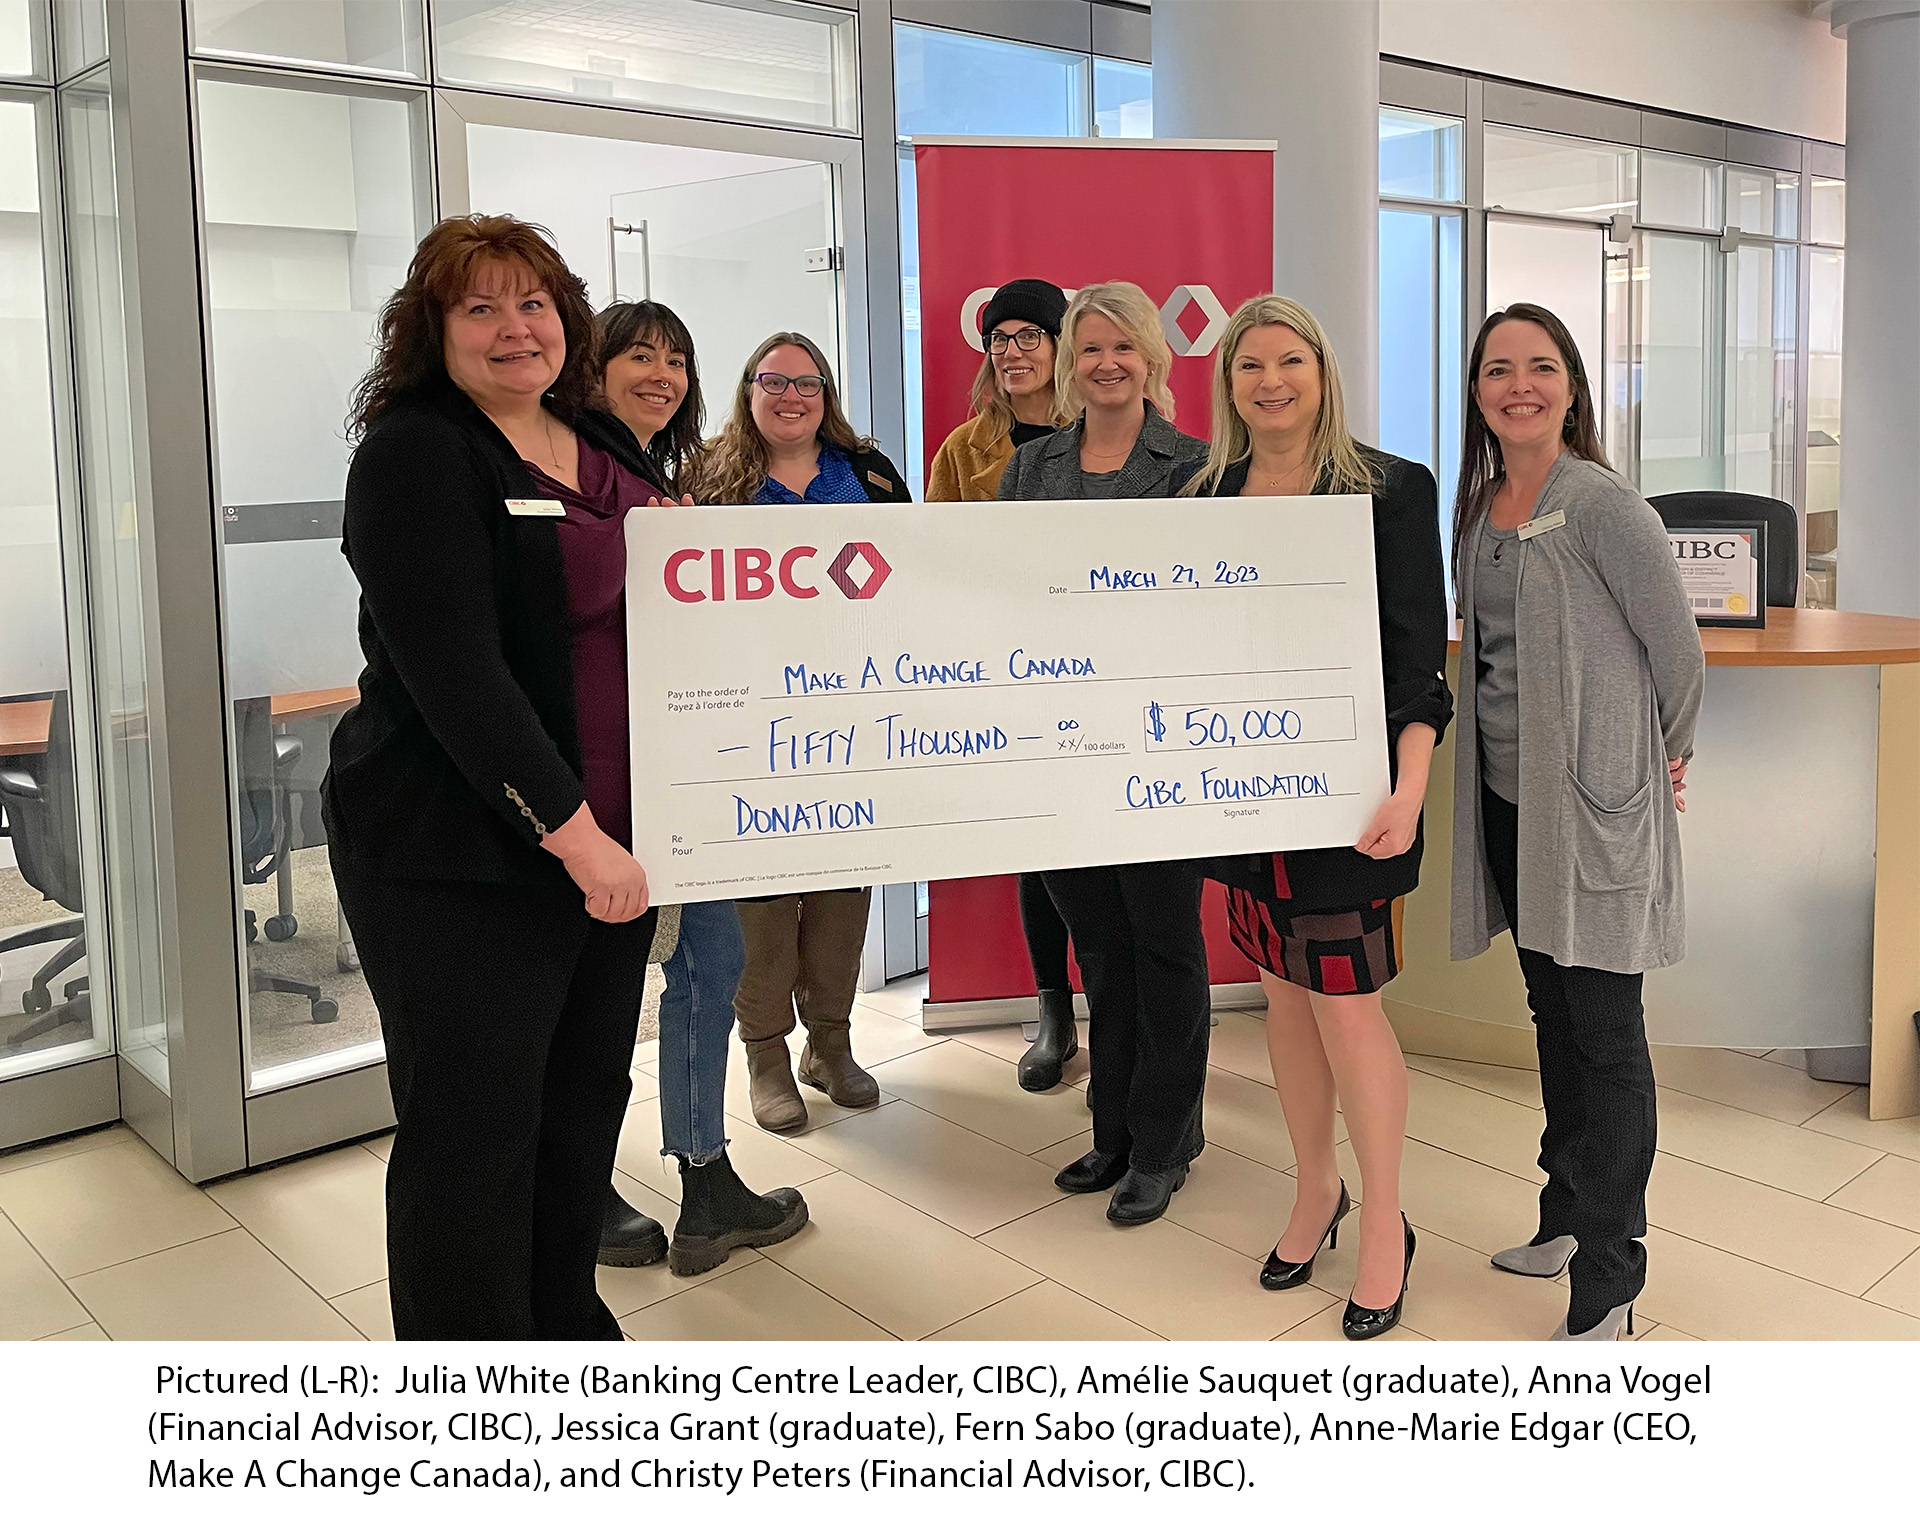 Photo of seven women standing together inside a CIBC branch with two of the women holding a large cheque written out for $50,000. Pictured from left to right: Julia White (Banking Centre Leader, CIBC), Amélie Sauquet (Graduate), Anna Vogel (Financial Advisor, CIBC), Jessica Grant (Graduate), Fern Sabo (Graduate), Anne-Marie Edgar (CEO, Make A Change Canada), and Christy Peters (Financial Advisor, CIBC).